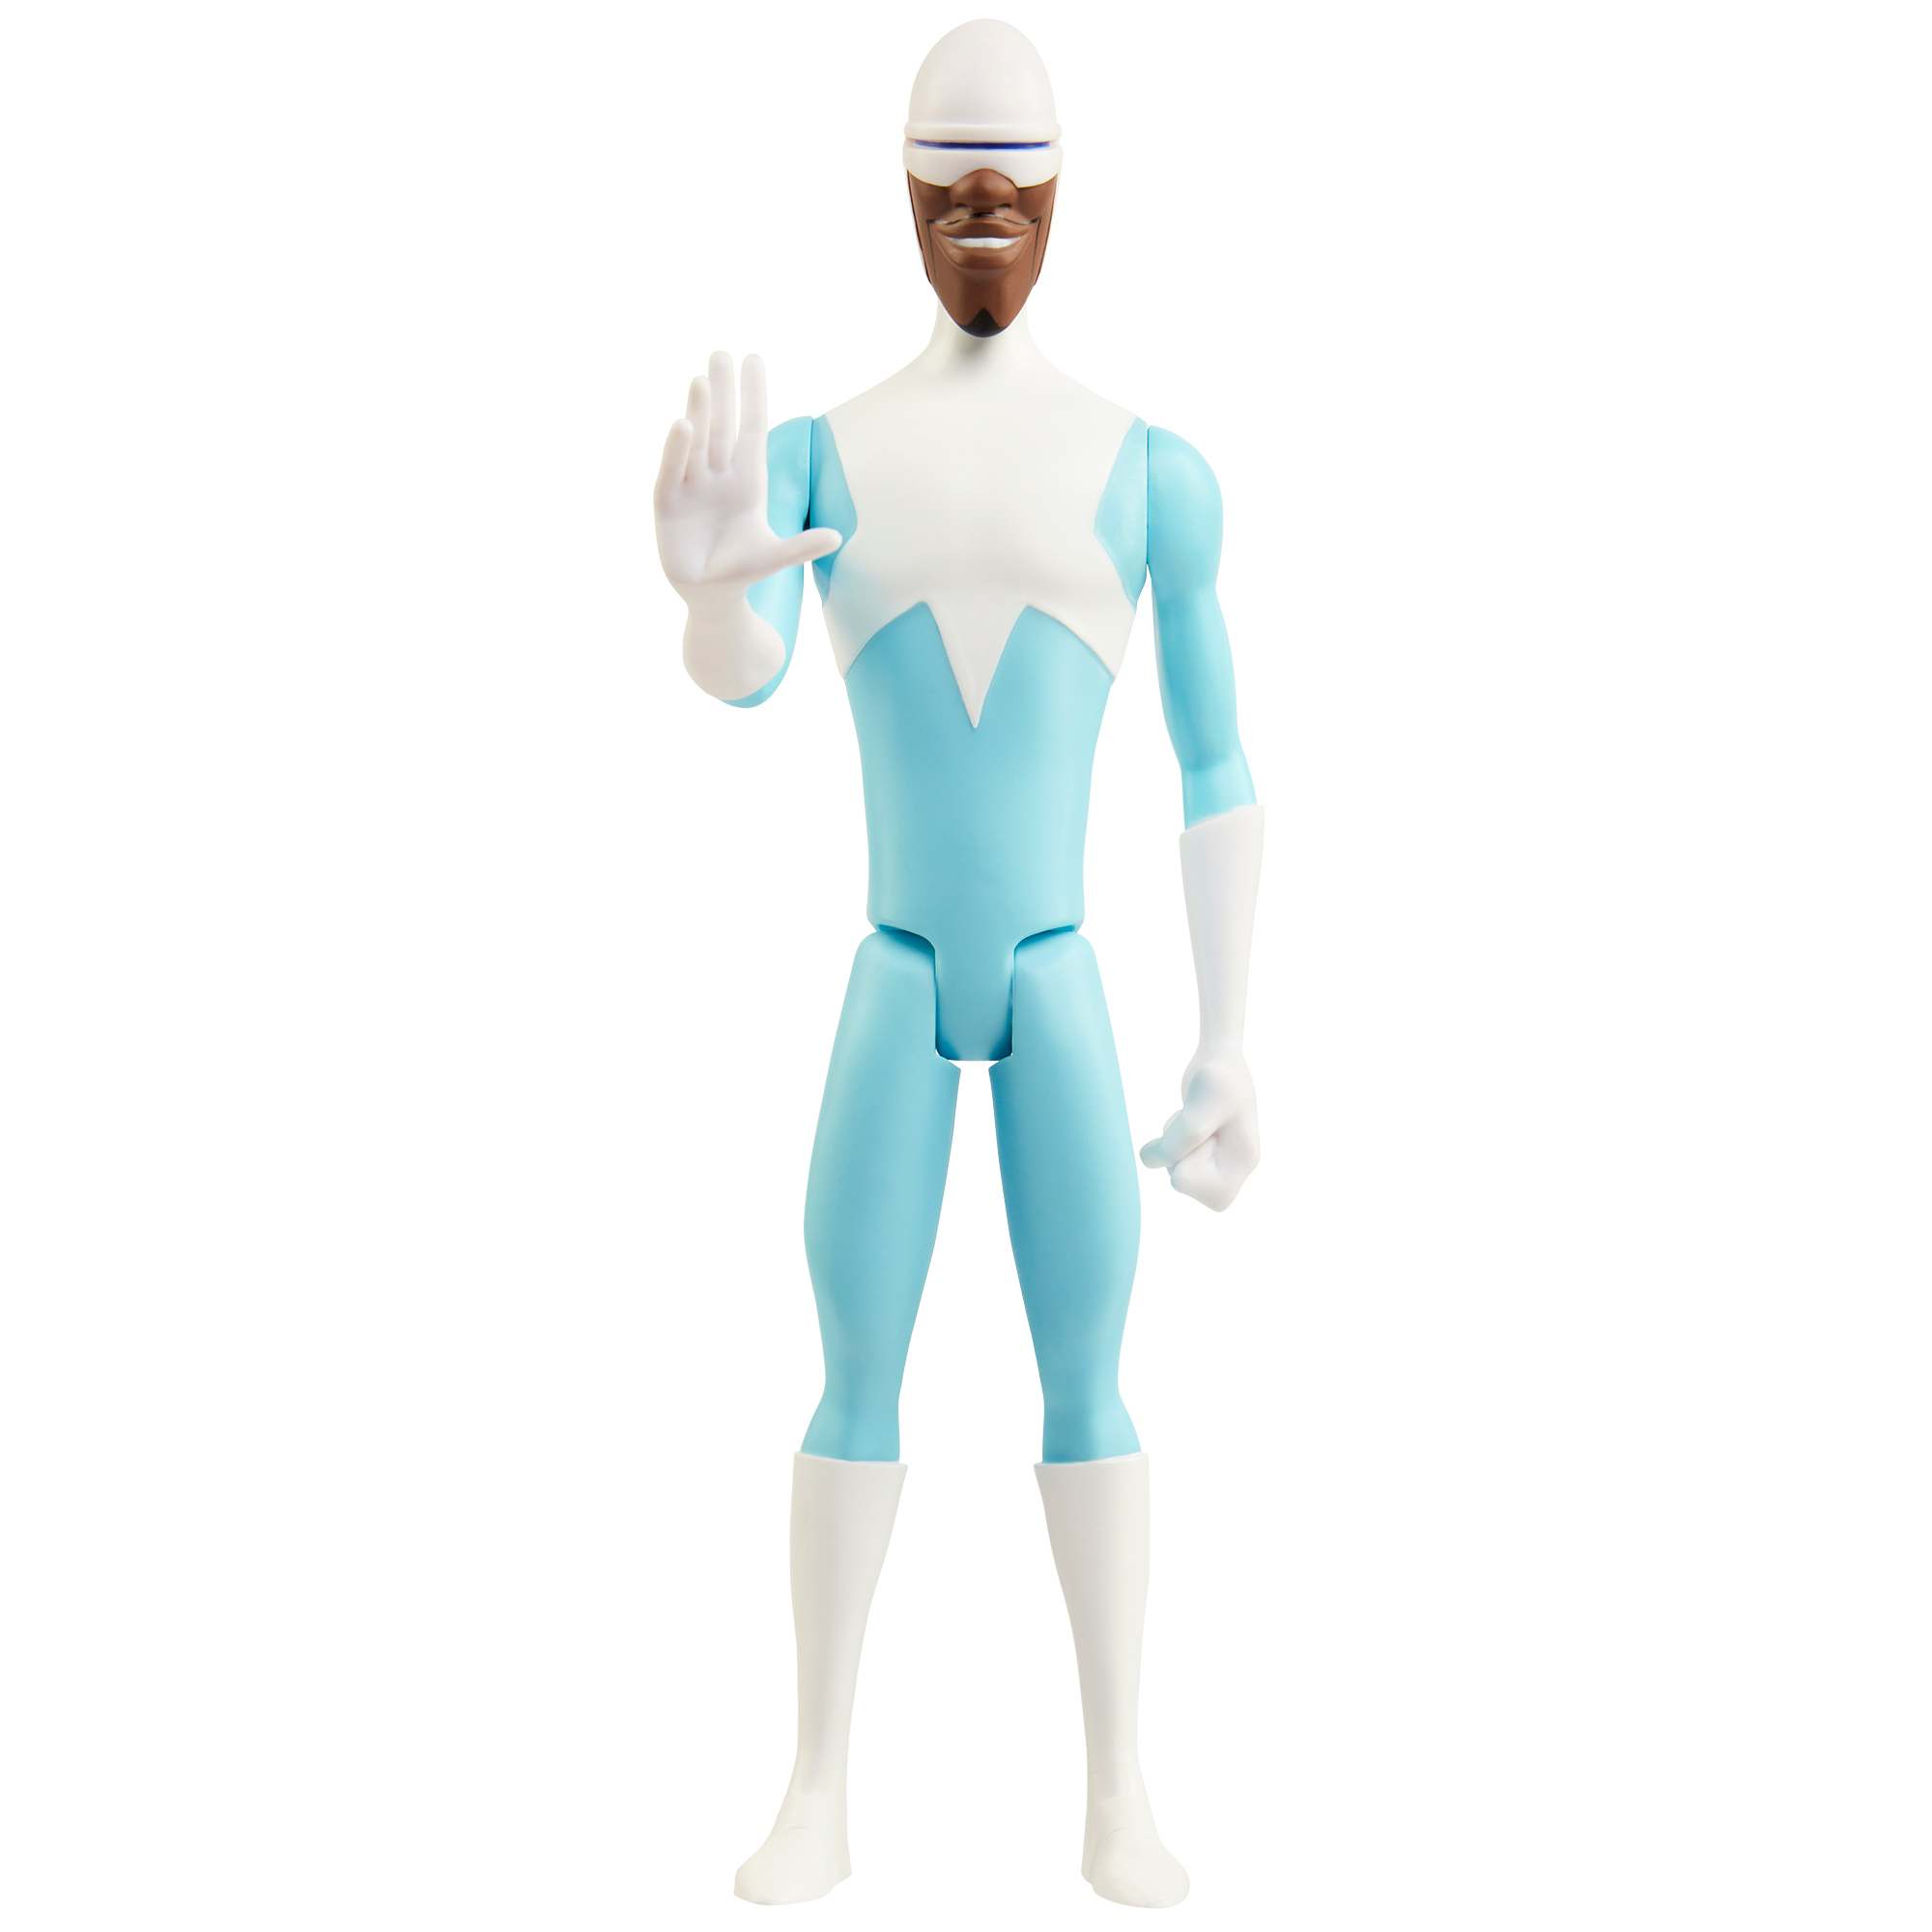 Incredibles champion series 12" action figure - frozone